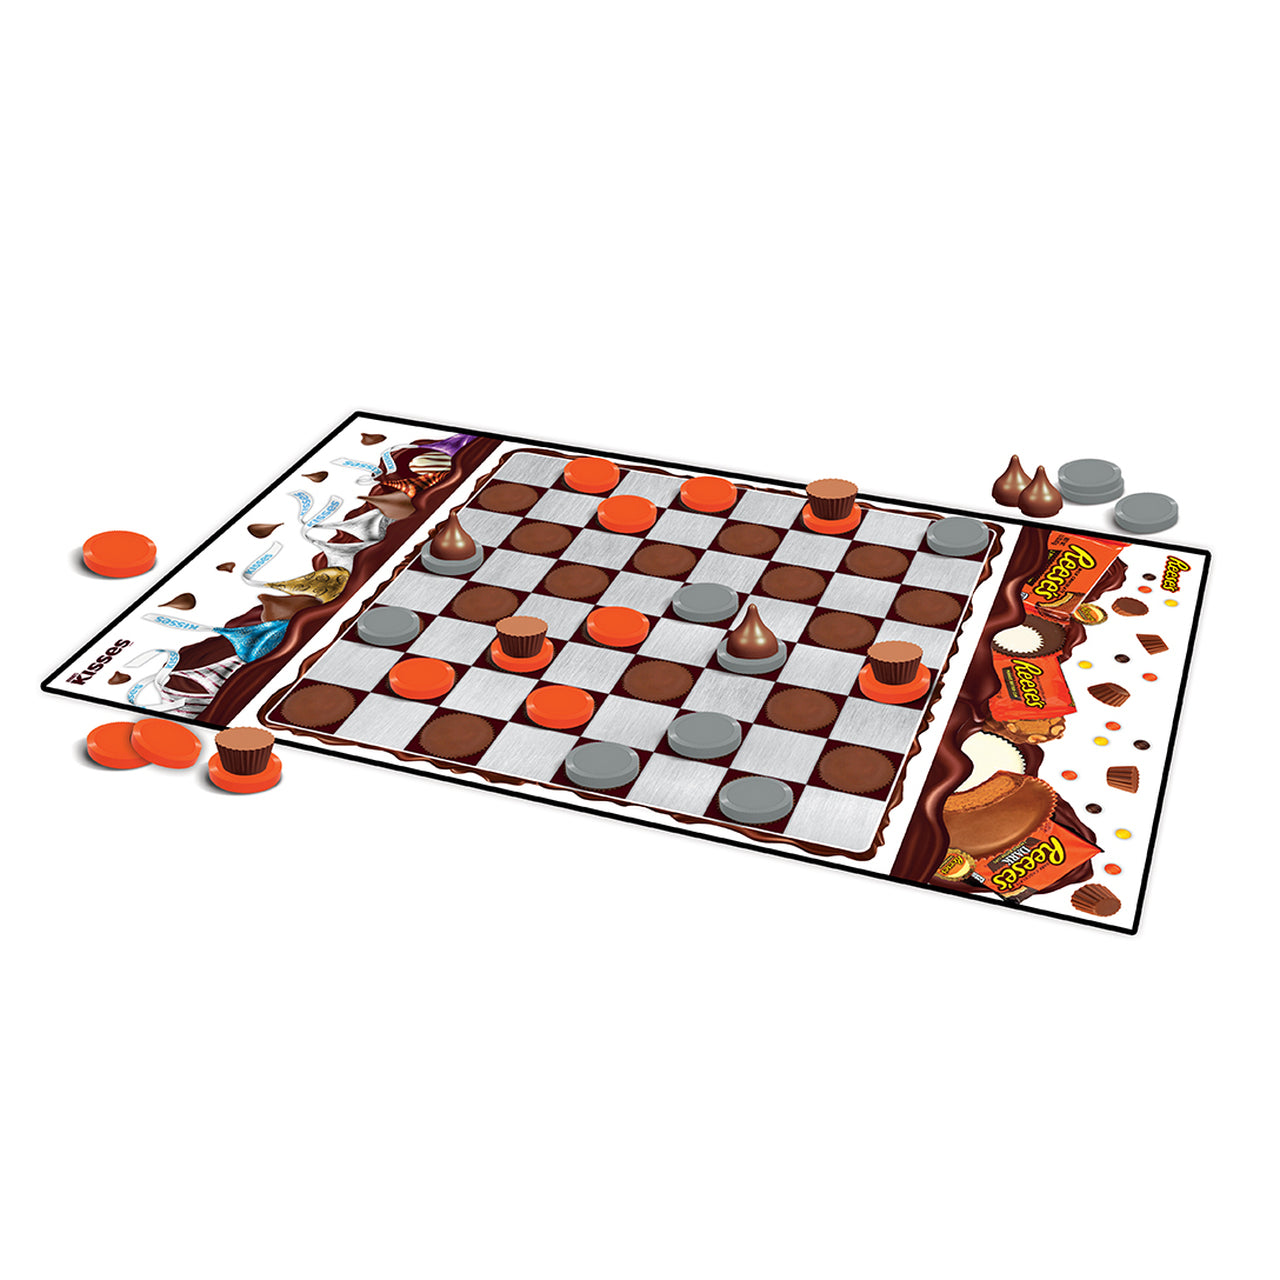 Hershey's Checkers Board Game by Masterpieces